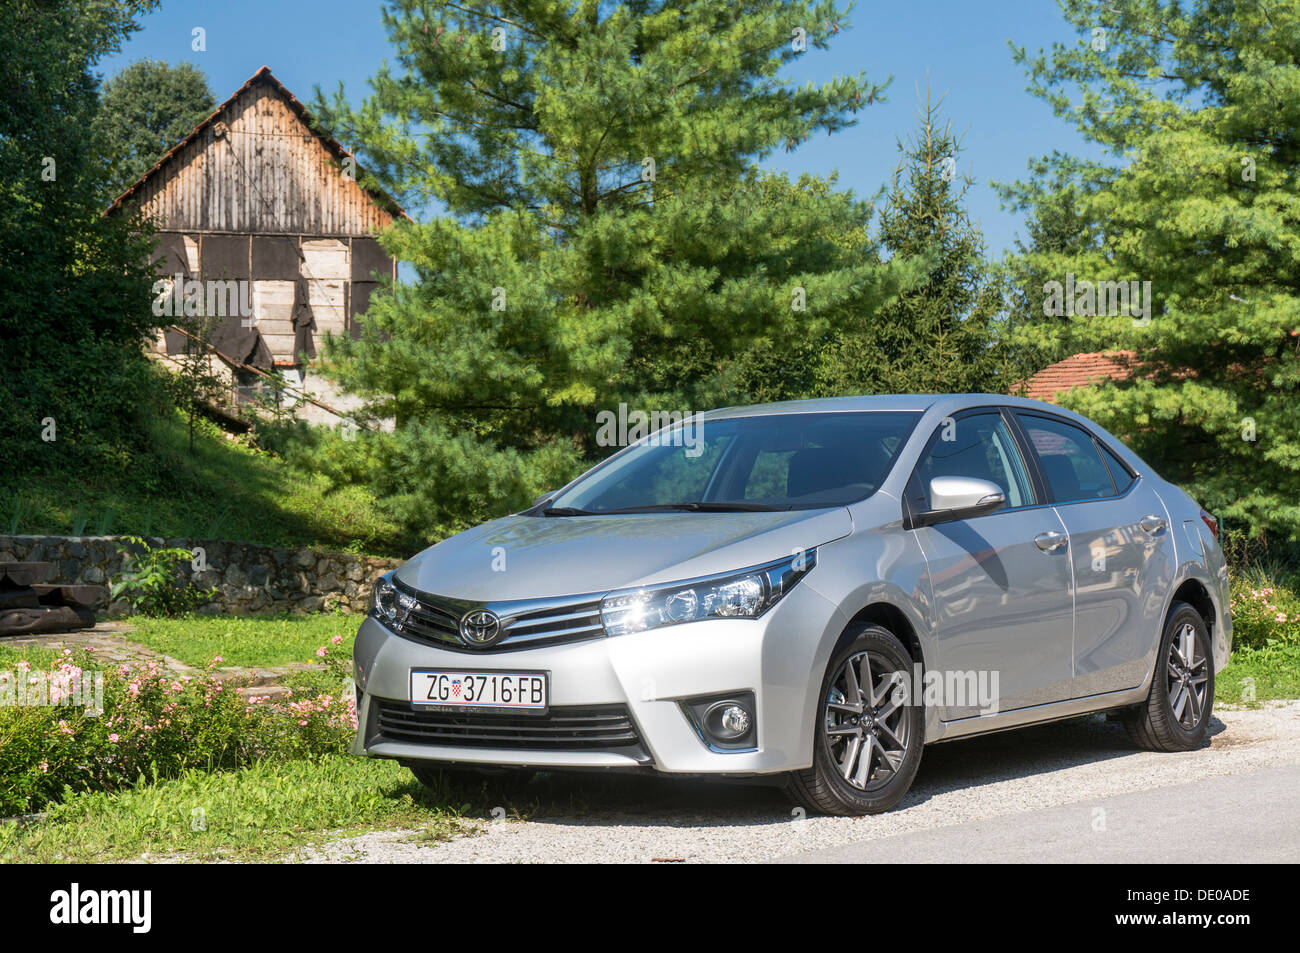 Toyota Corolla 2013., 11th generation of the best selling car in